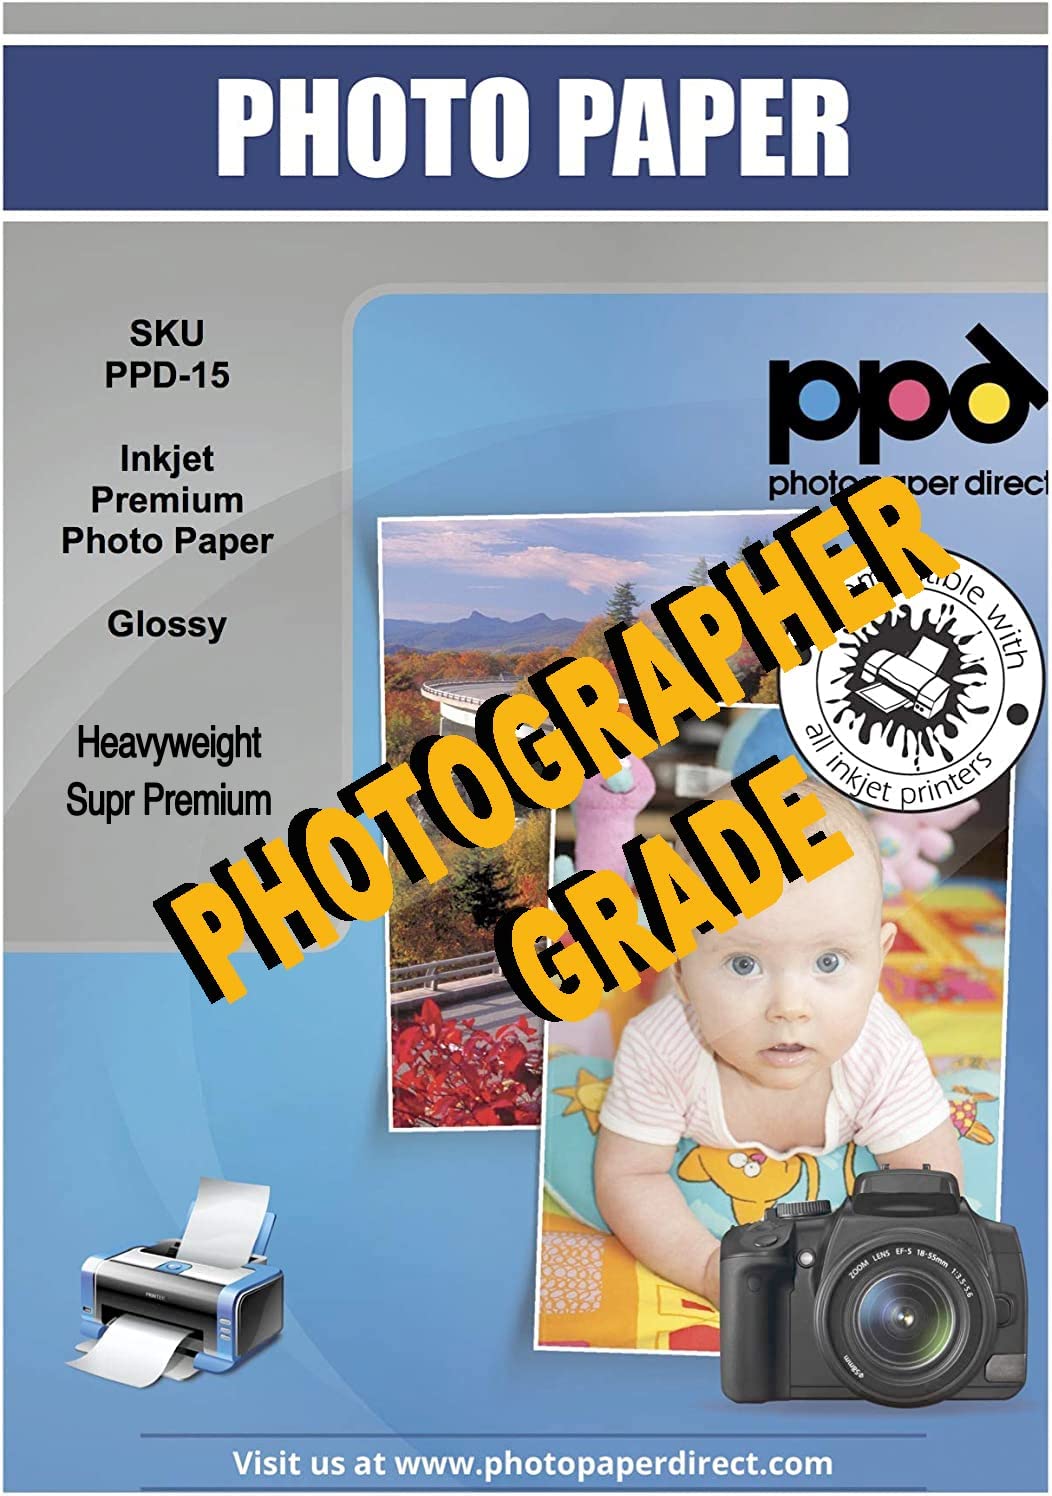 PPD Inkjet Premium Photo Paper Glossy 8.5 x 11" 68lb. 255gsm 10.5mil PPD-15